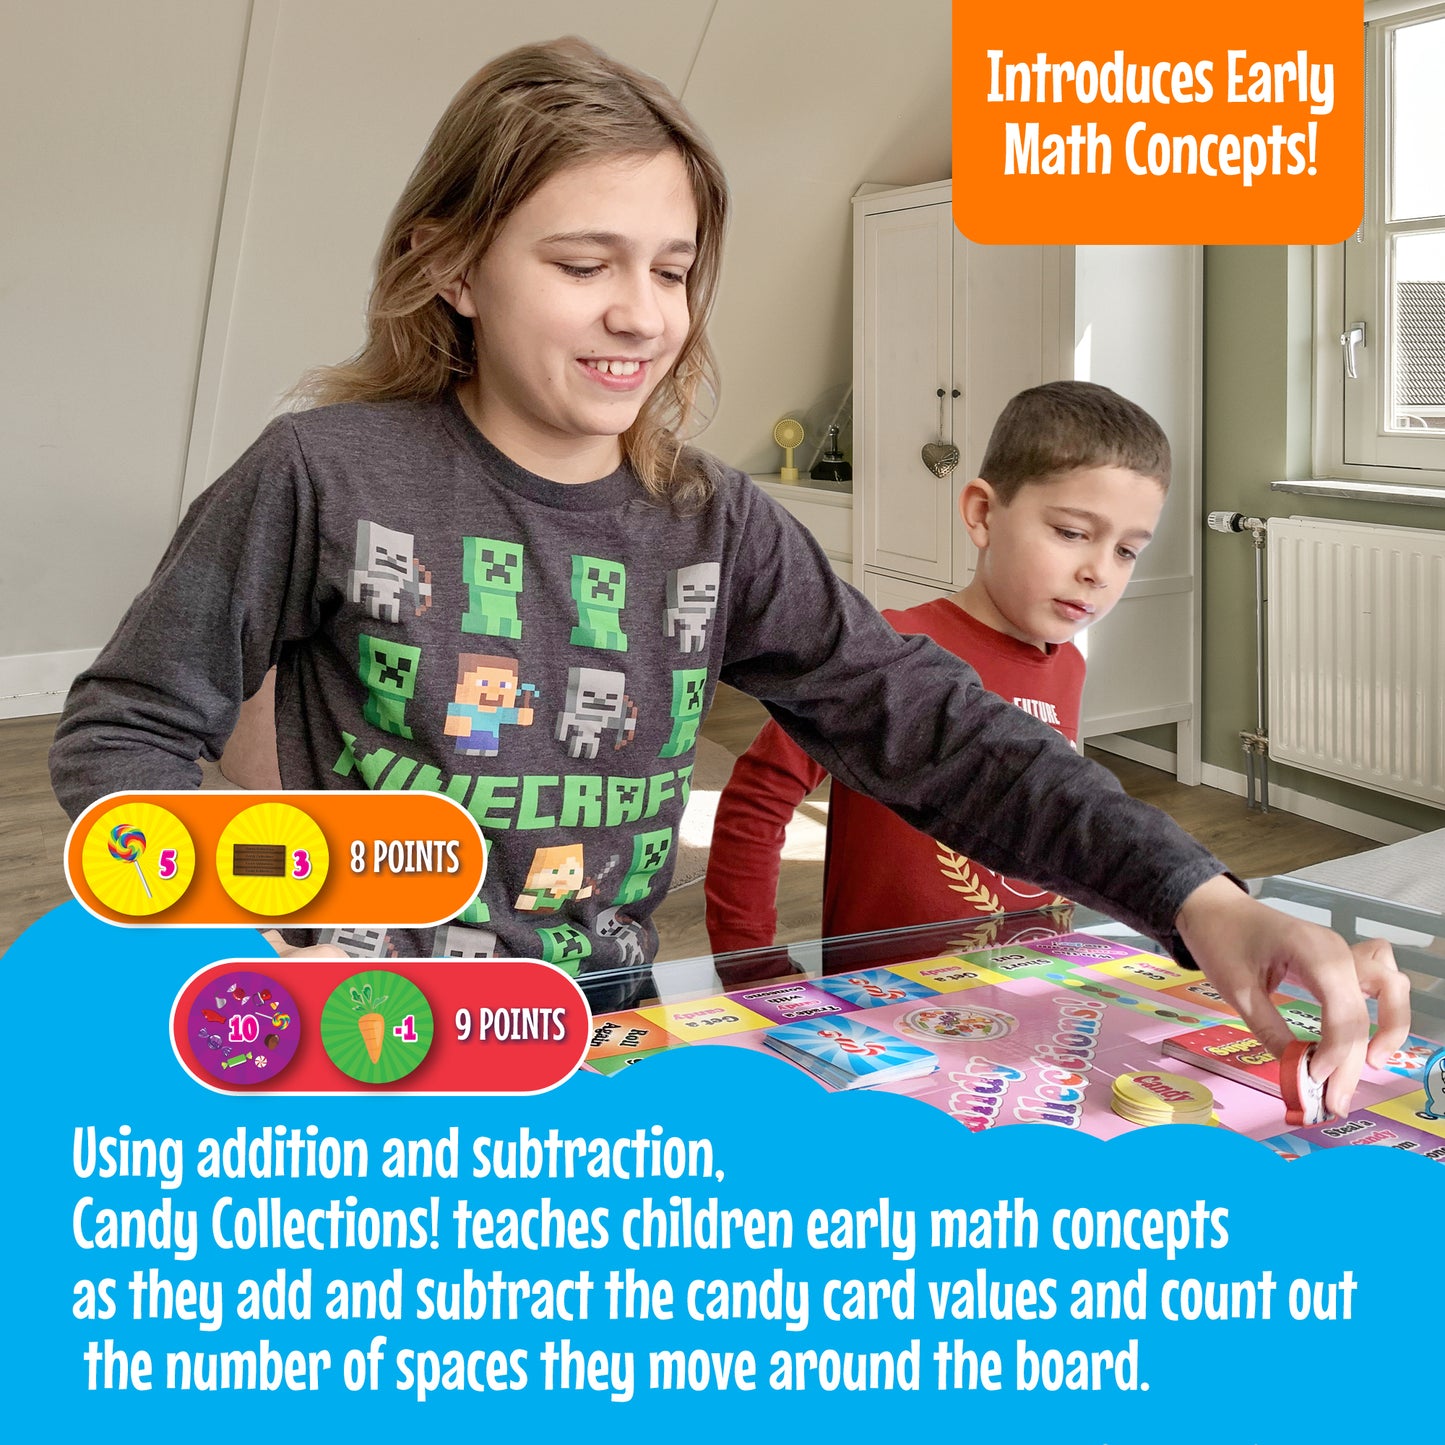 Board Game that Introduces Early Math Concepts